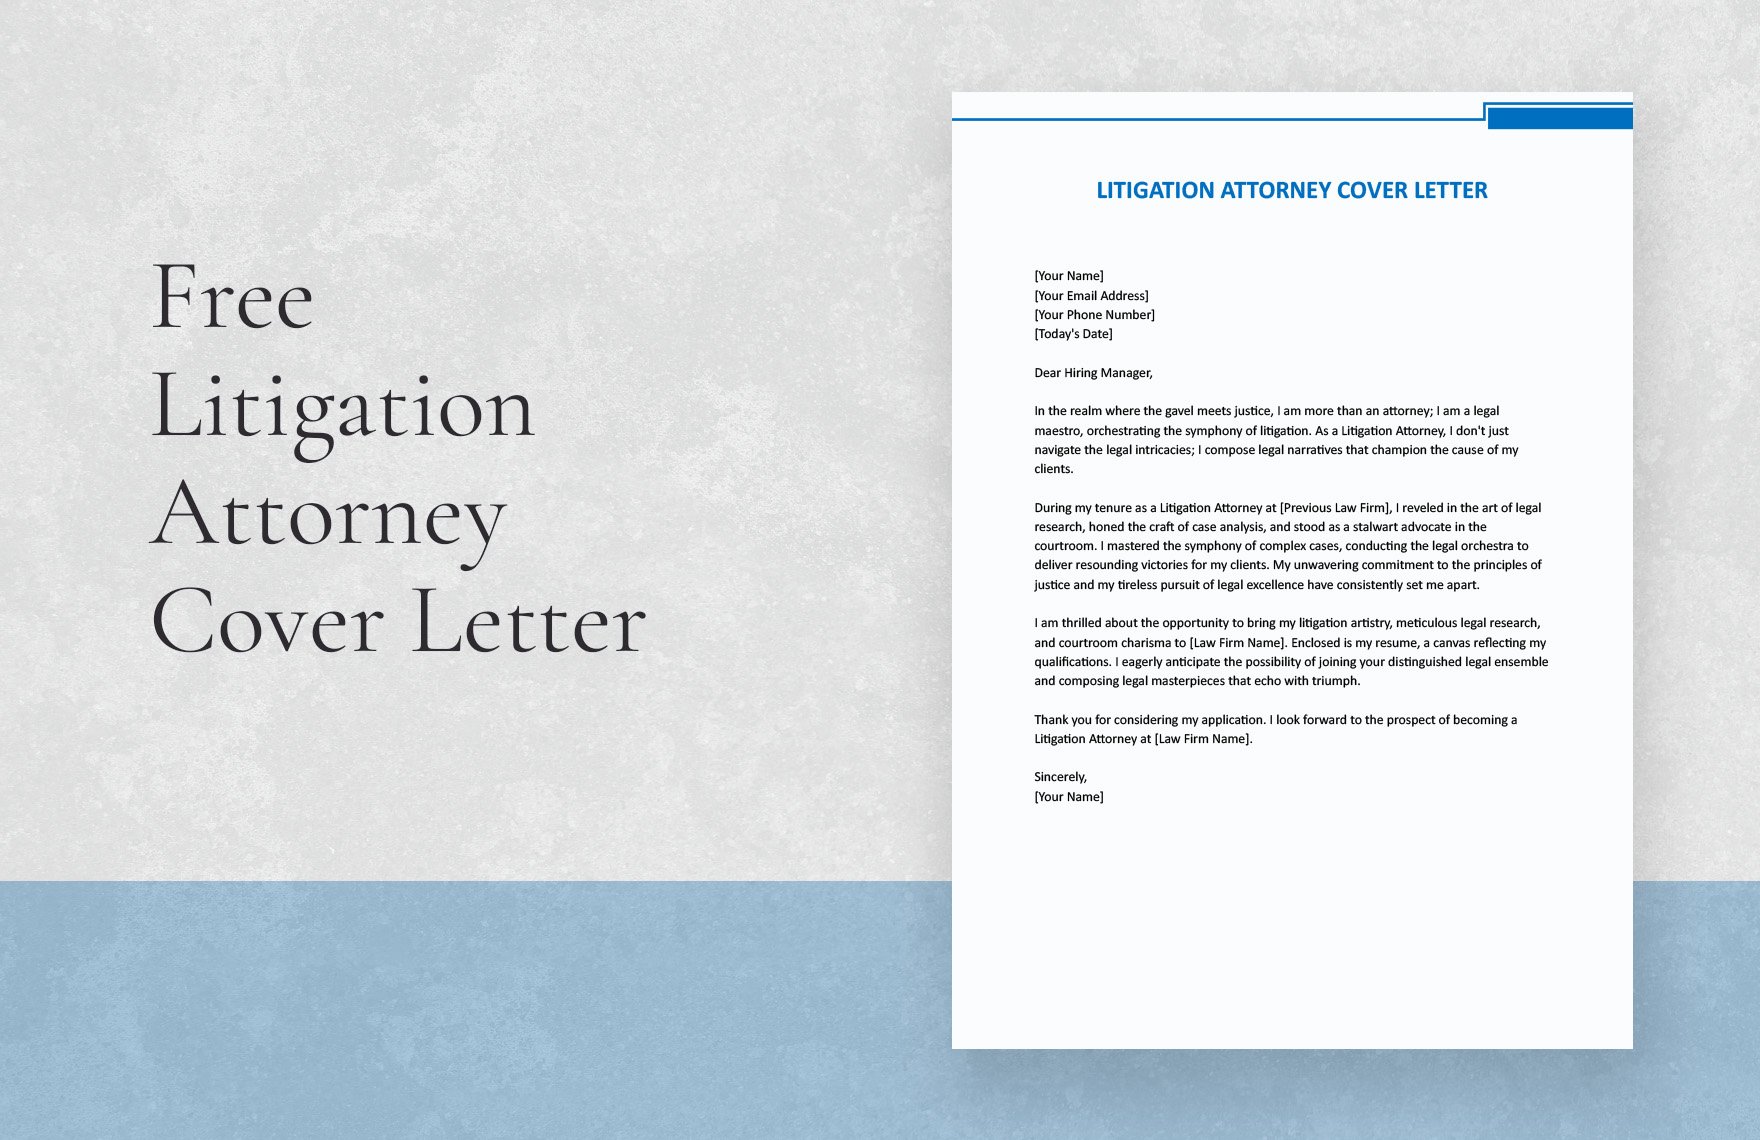 Litigation Attorney Cover Letter in Word, Google Docs